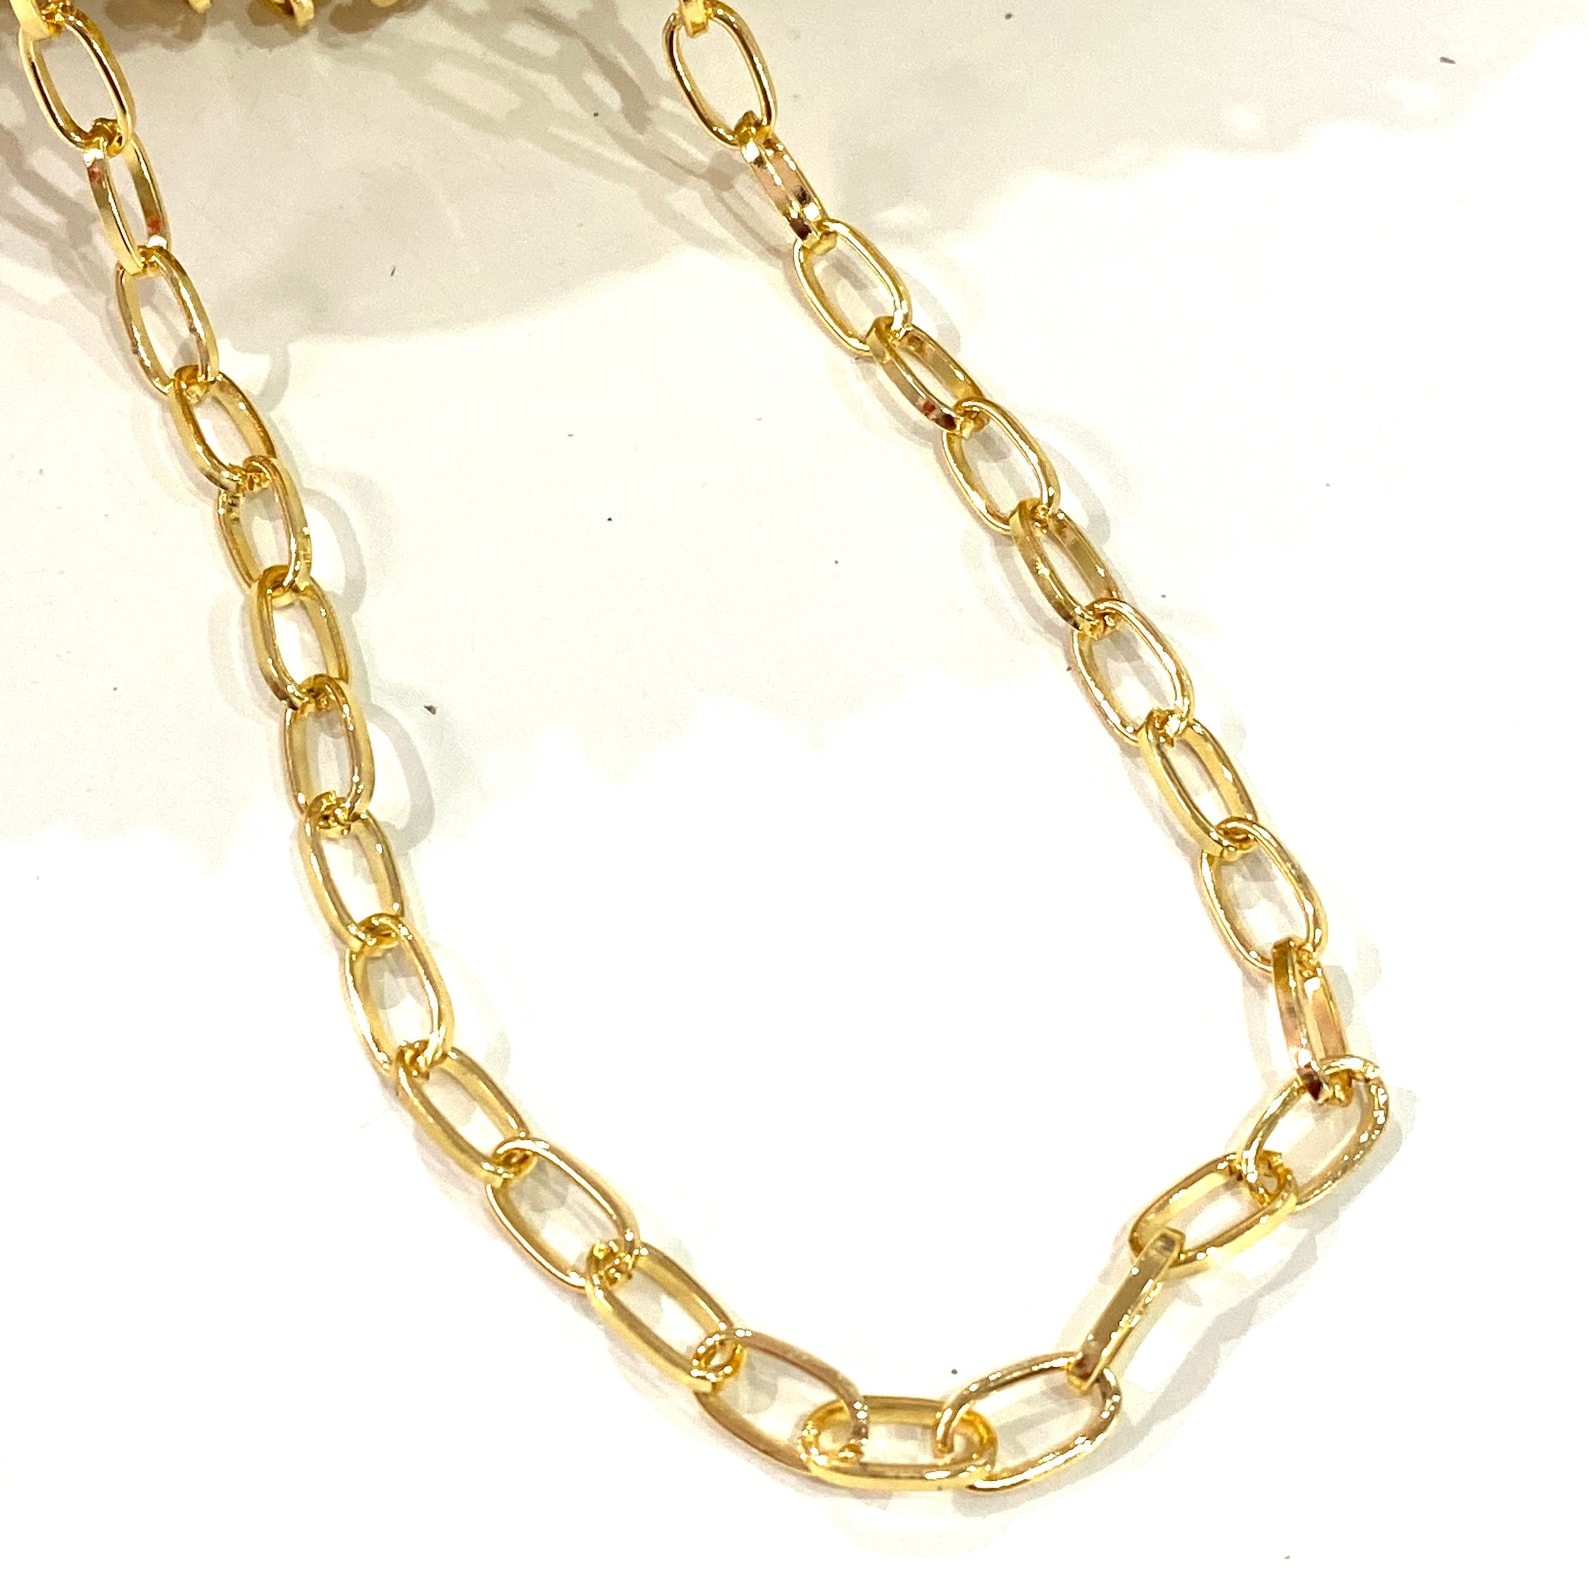 24kt Shiny Gold Plated Chain 9x5mm Open Links - Etsy UK